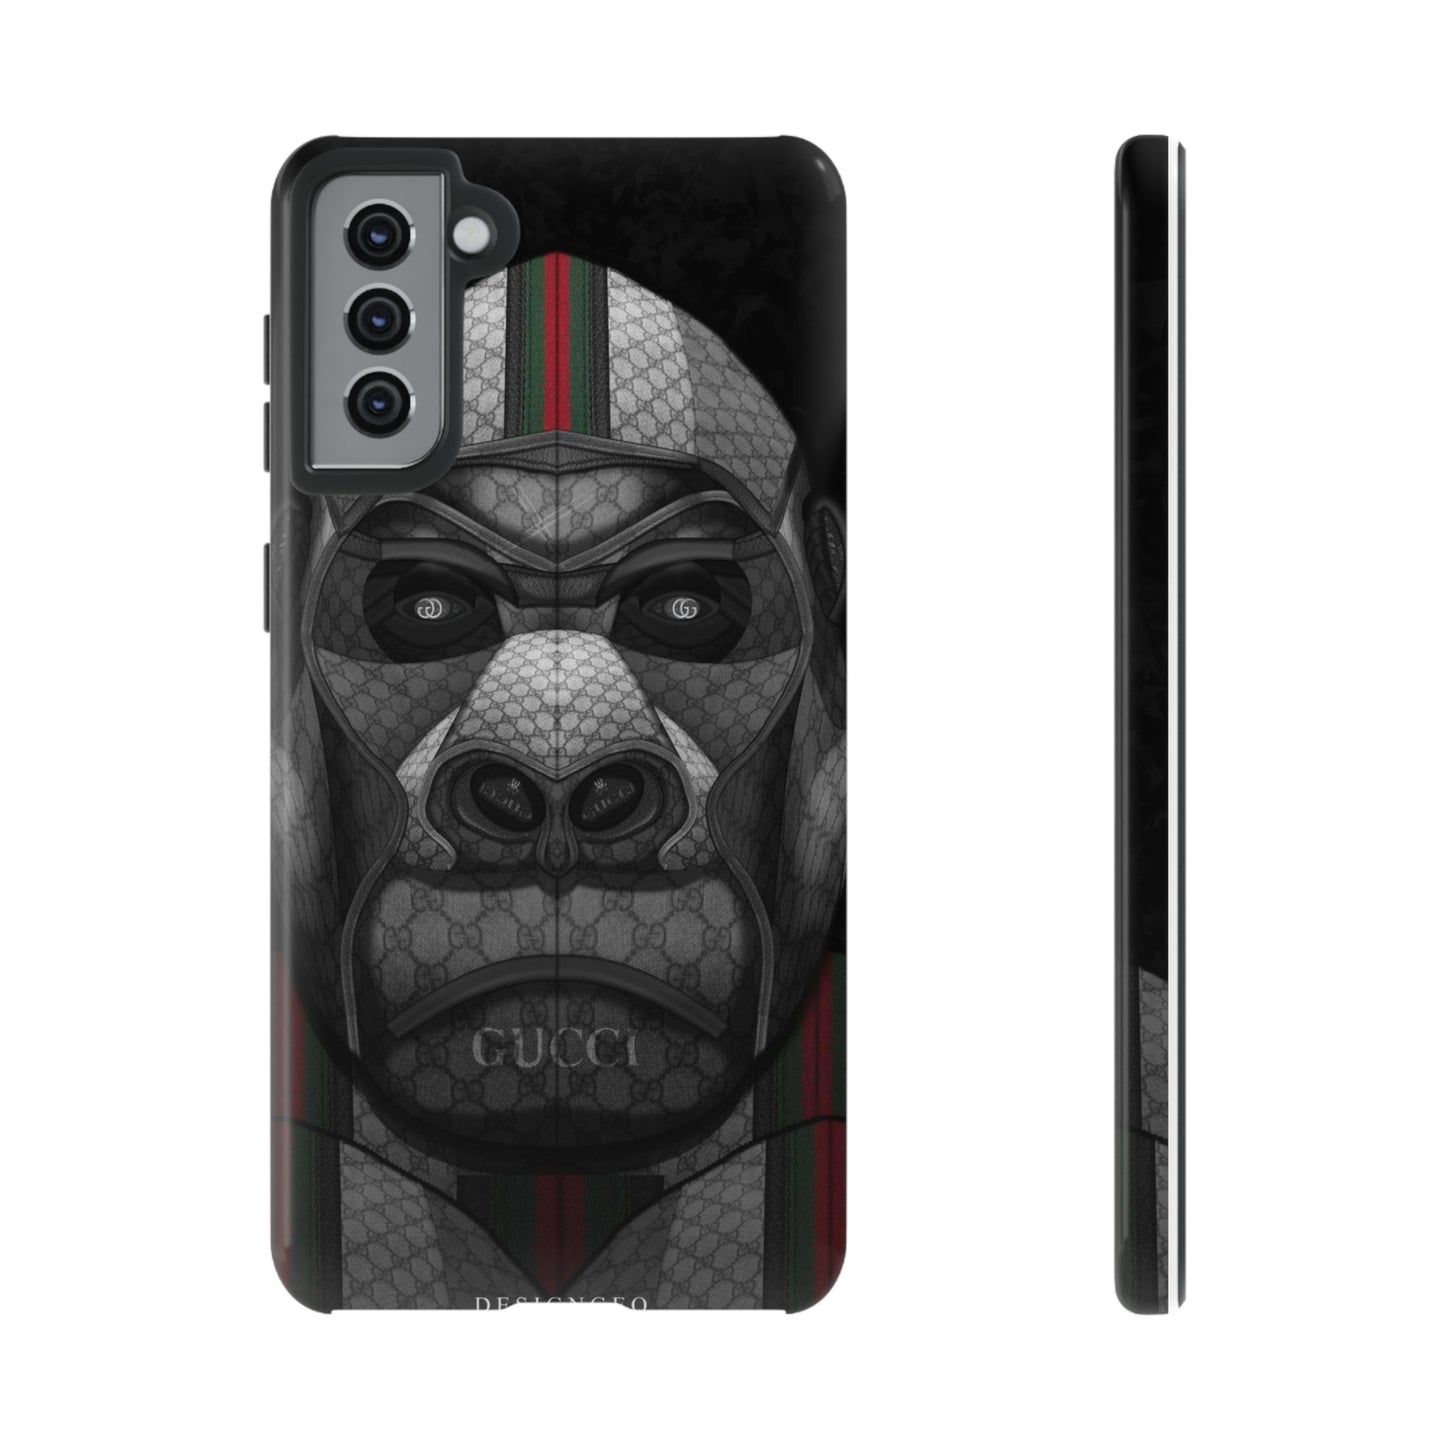 GUCCI DOPiFiED" Tough Cases